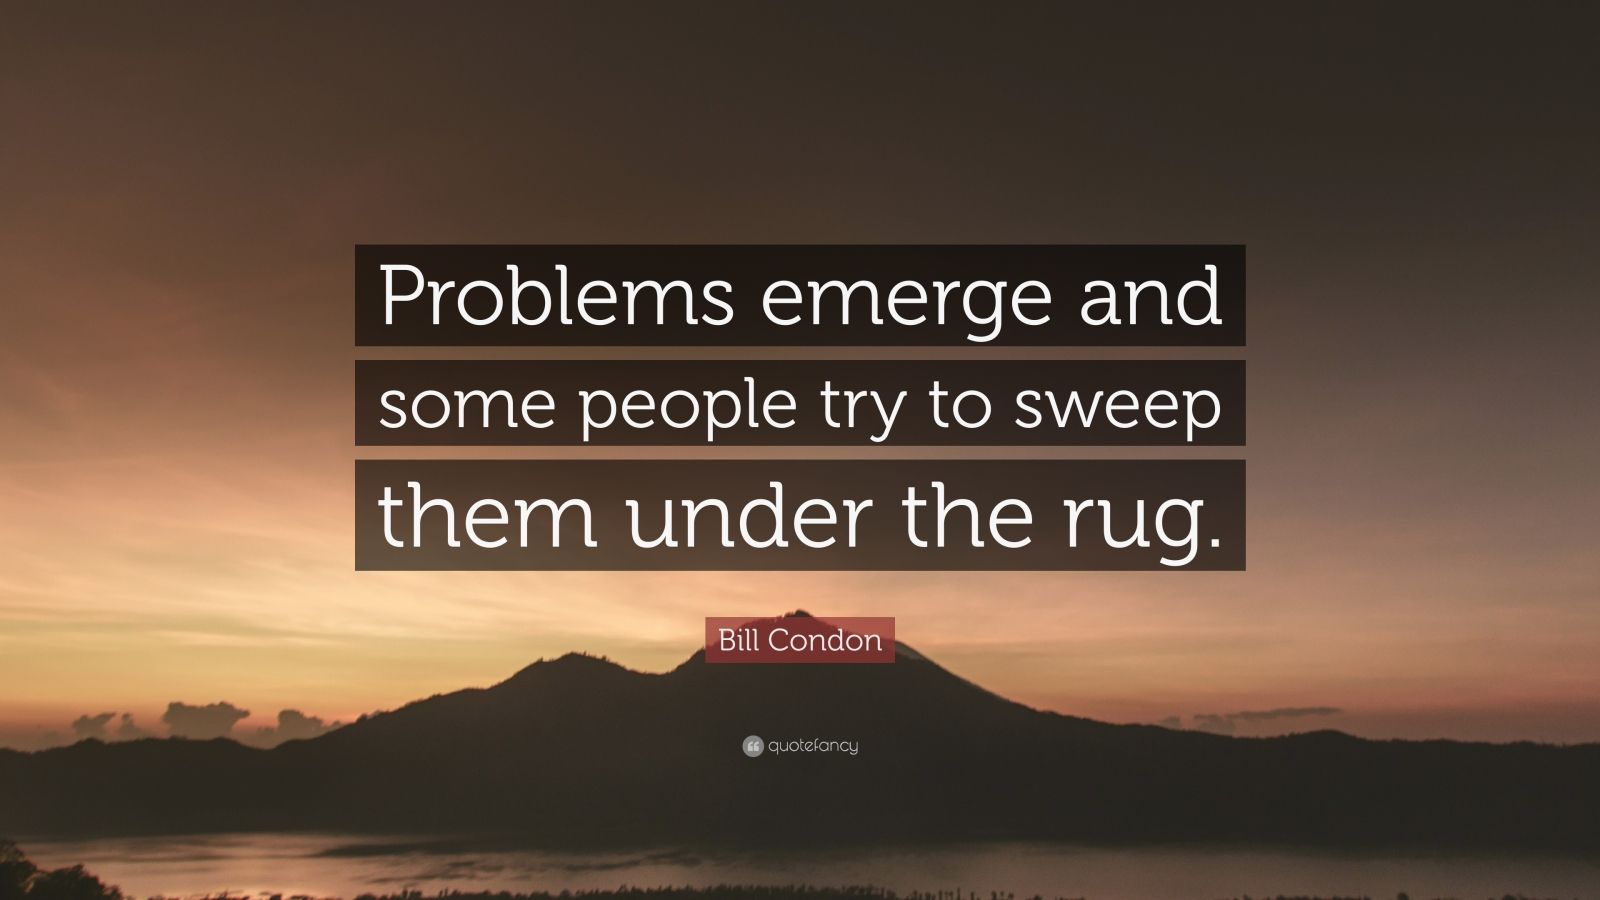 Bill Condon Quote “Problems emerge and some people try to sweep them under the rug.”